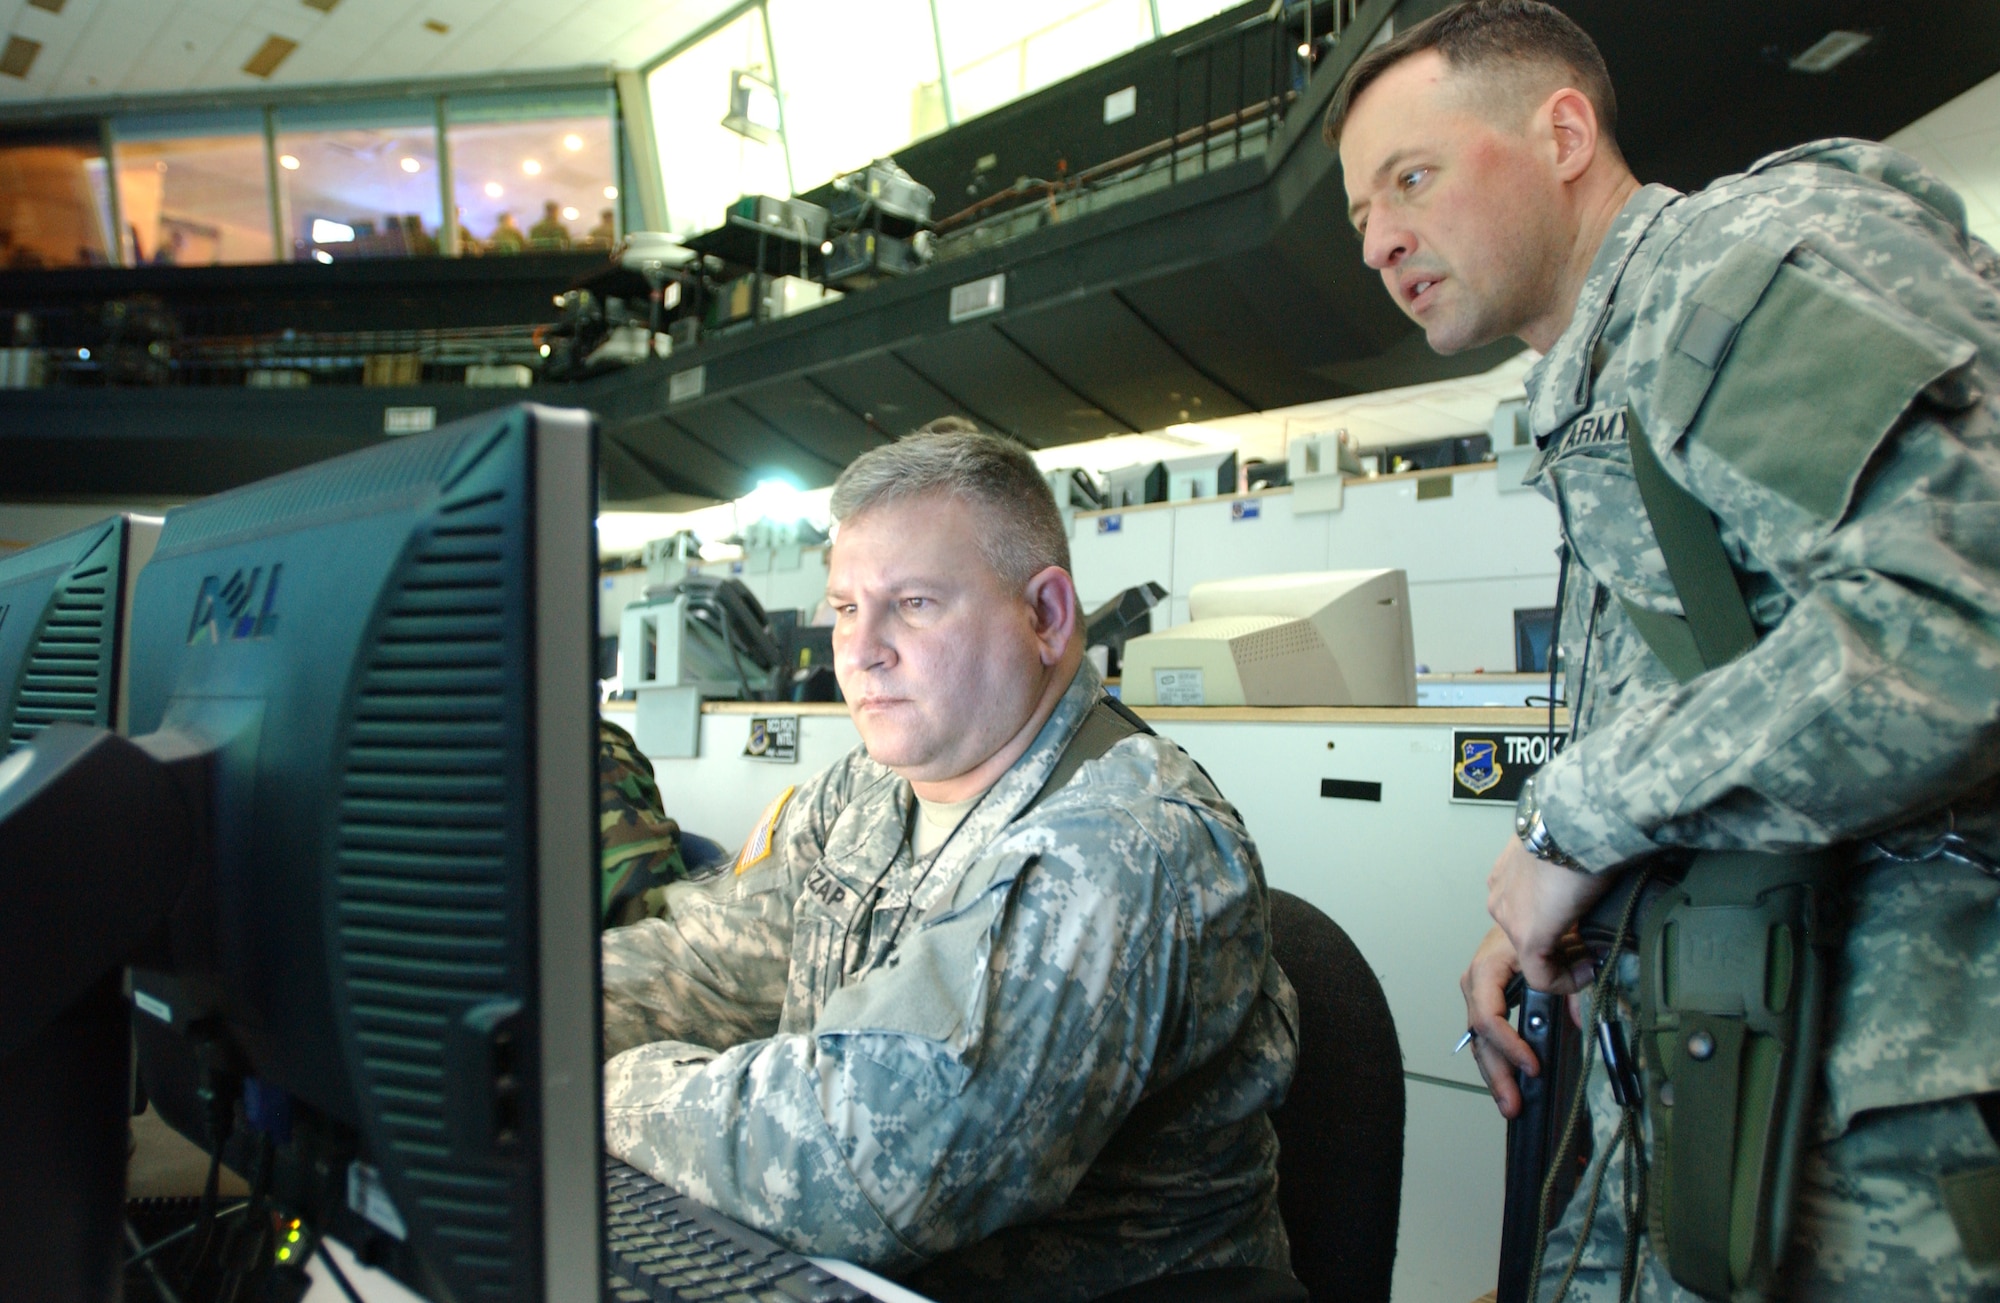 OSAN AIR BASE, Republic of Korea --  Lt. Col. Philip McCutcheon, 3rd Battlefield Coordination Detachment deputy commander, and Sgt. 1st Class Wessley Czap, 3rd BCD operations NCO, analyze incoming data on the computer monitor during RSO&I on Monday. (U.S. Air Force photo by Staff Sgt. Francisco V. Govea II)